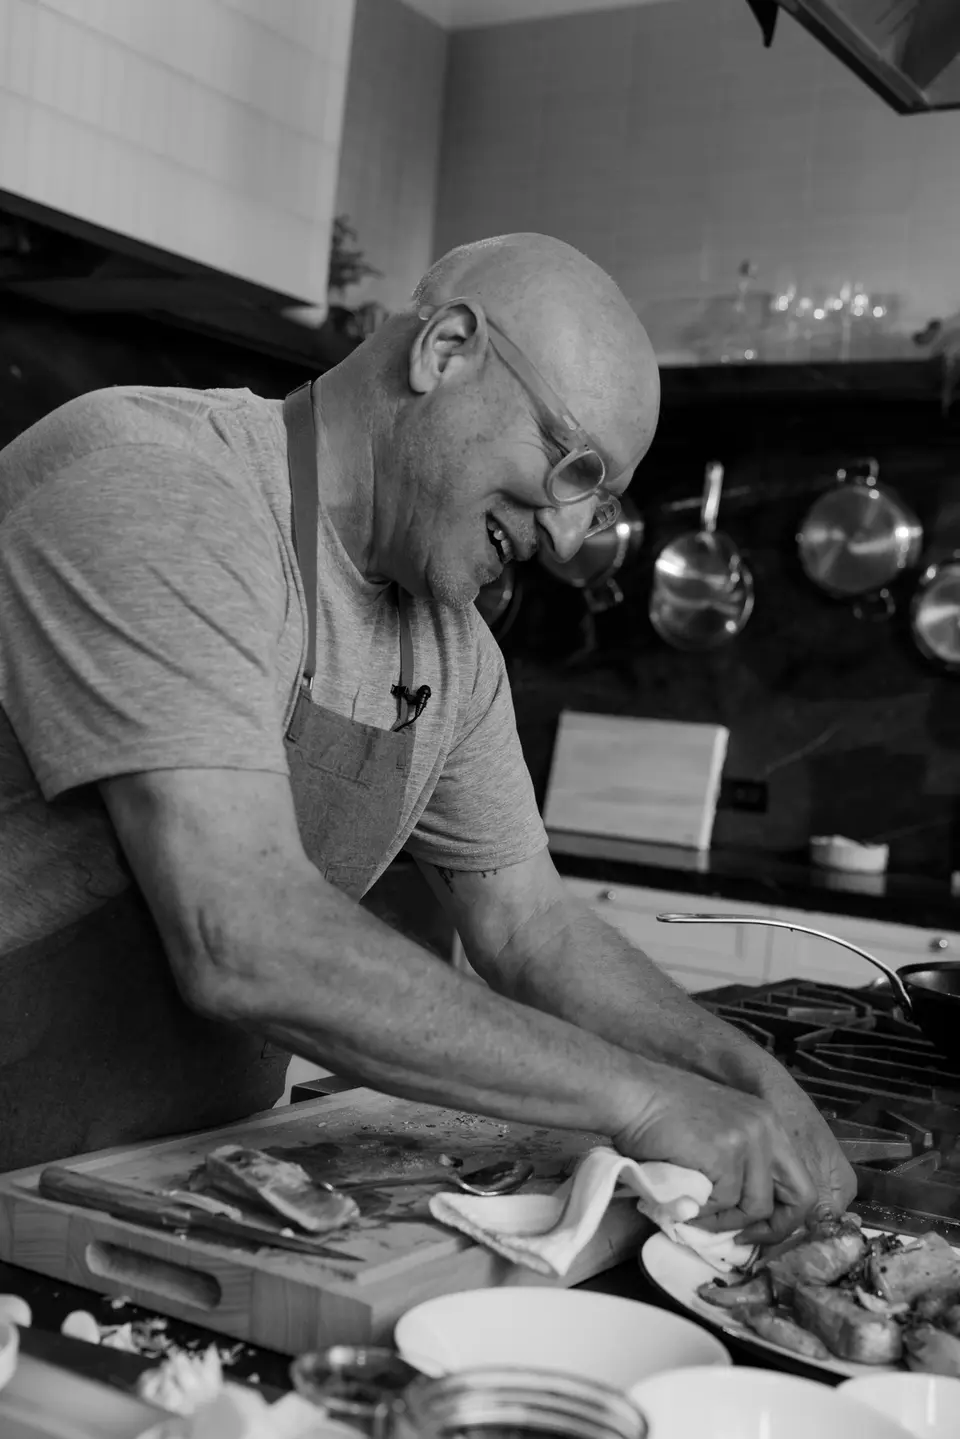 A black and white photo of a bald man in glasses smiling as he focuses on cooking in a kitchen filled with utensils and pots.